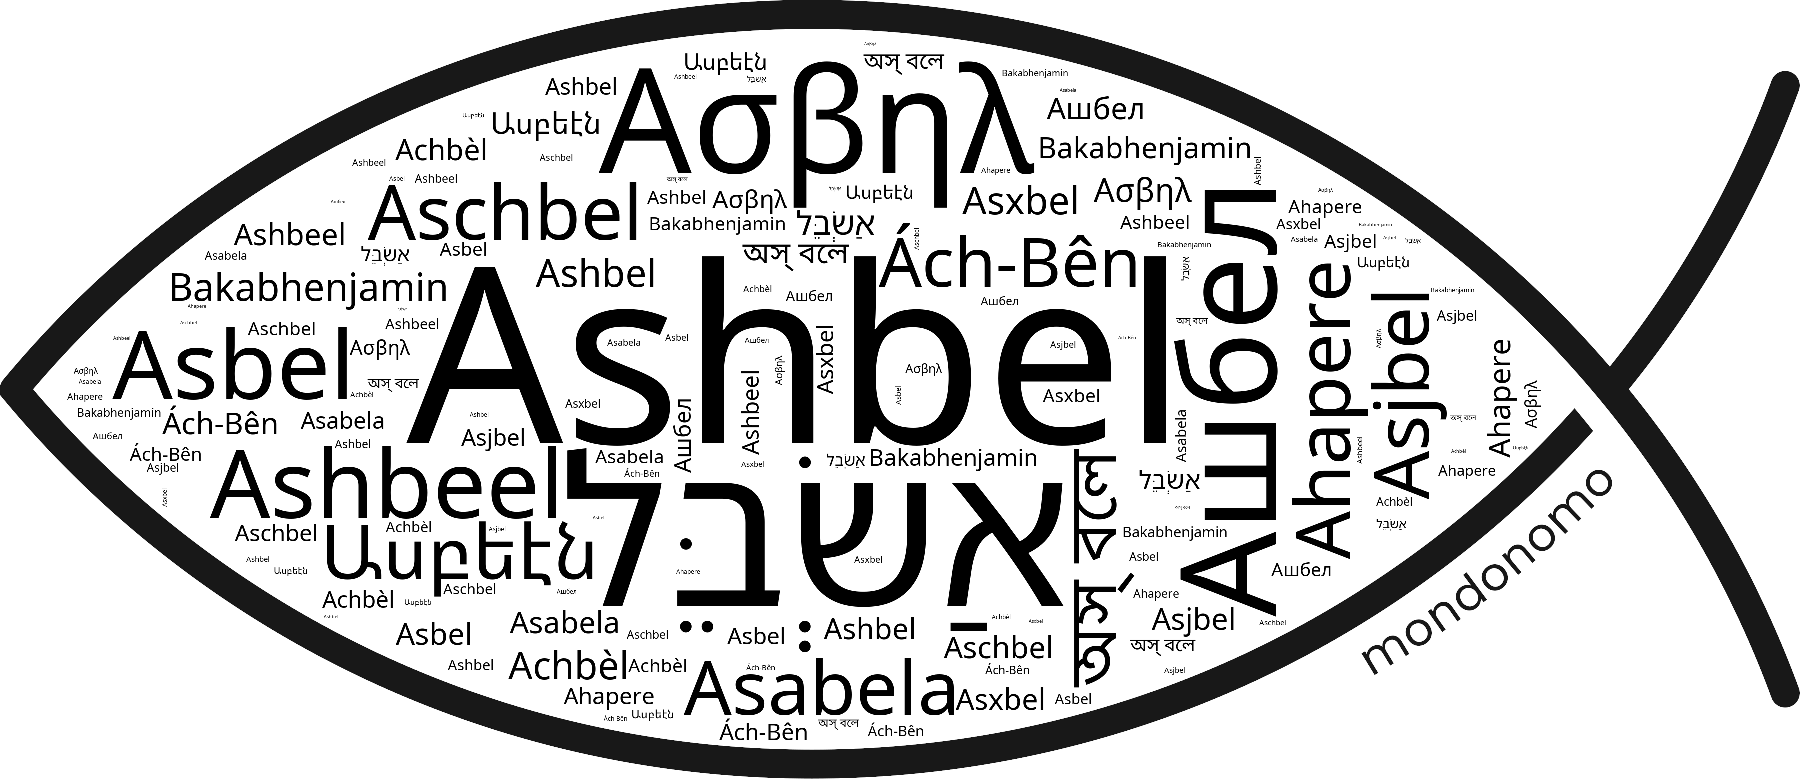 Name Ashbel in the world's Bibles